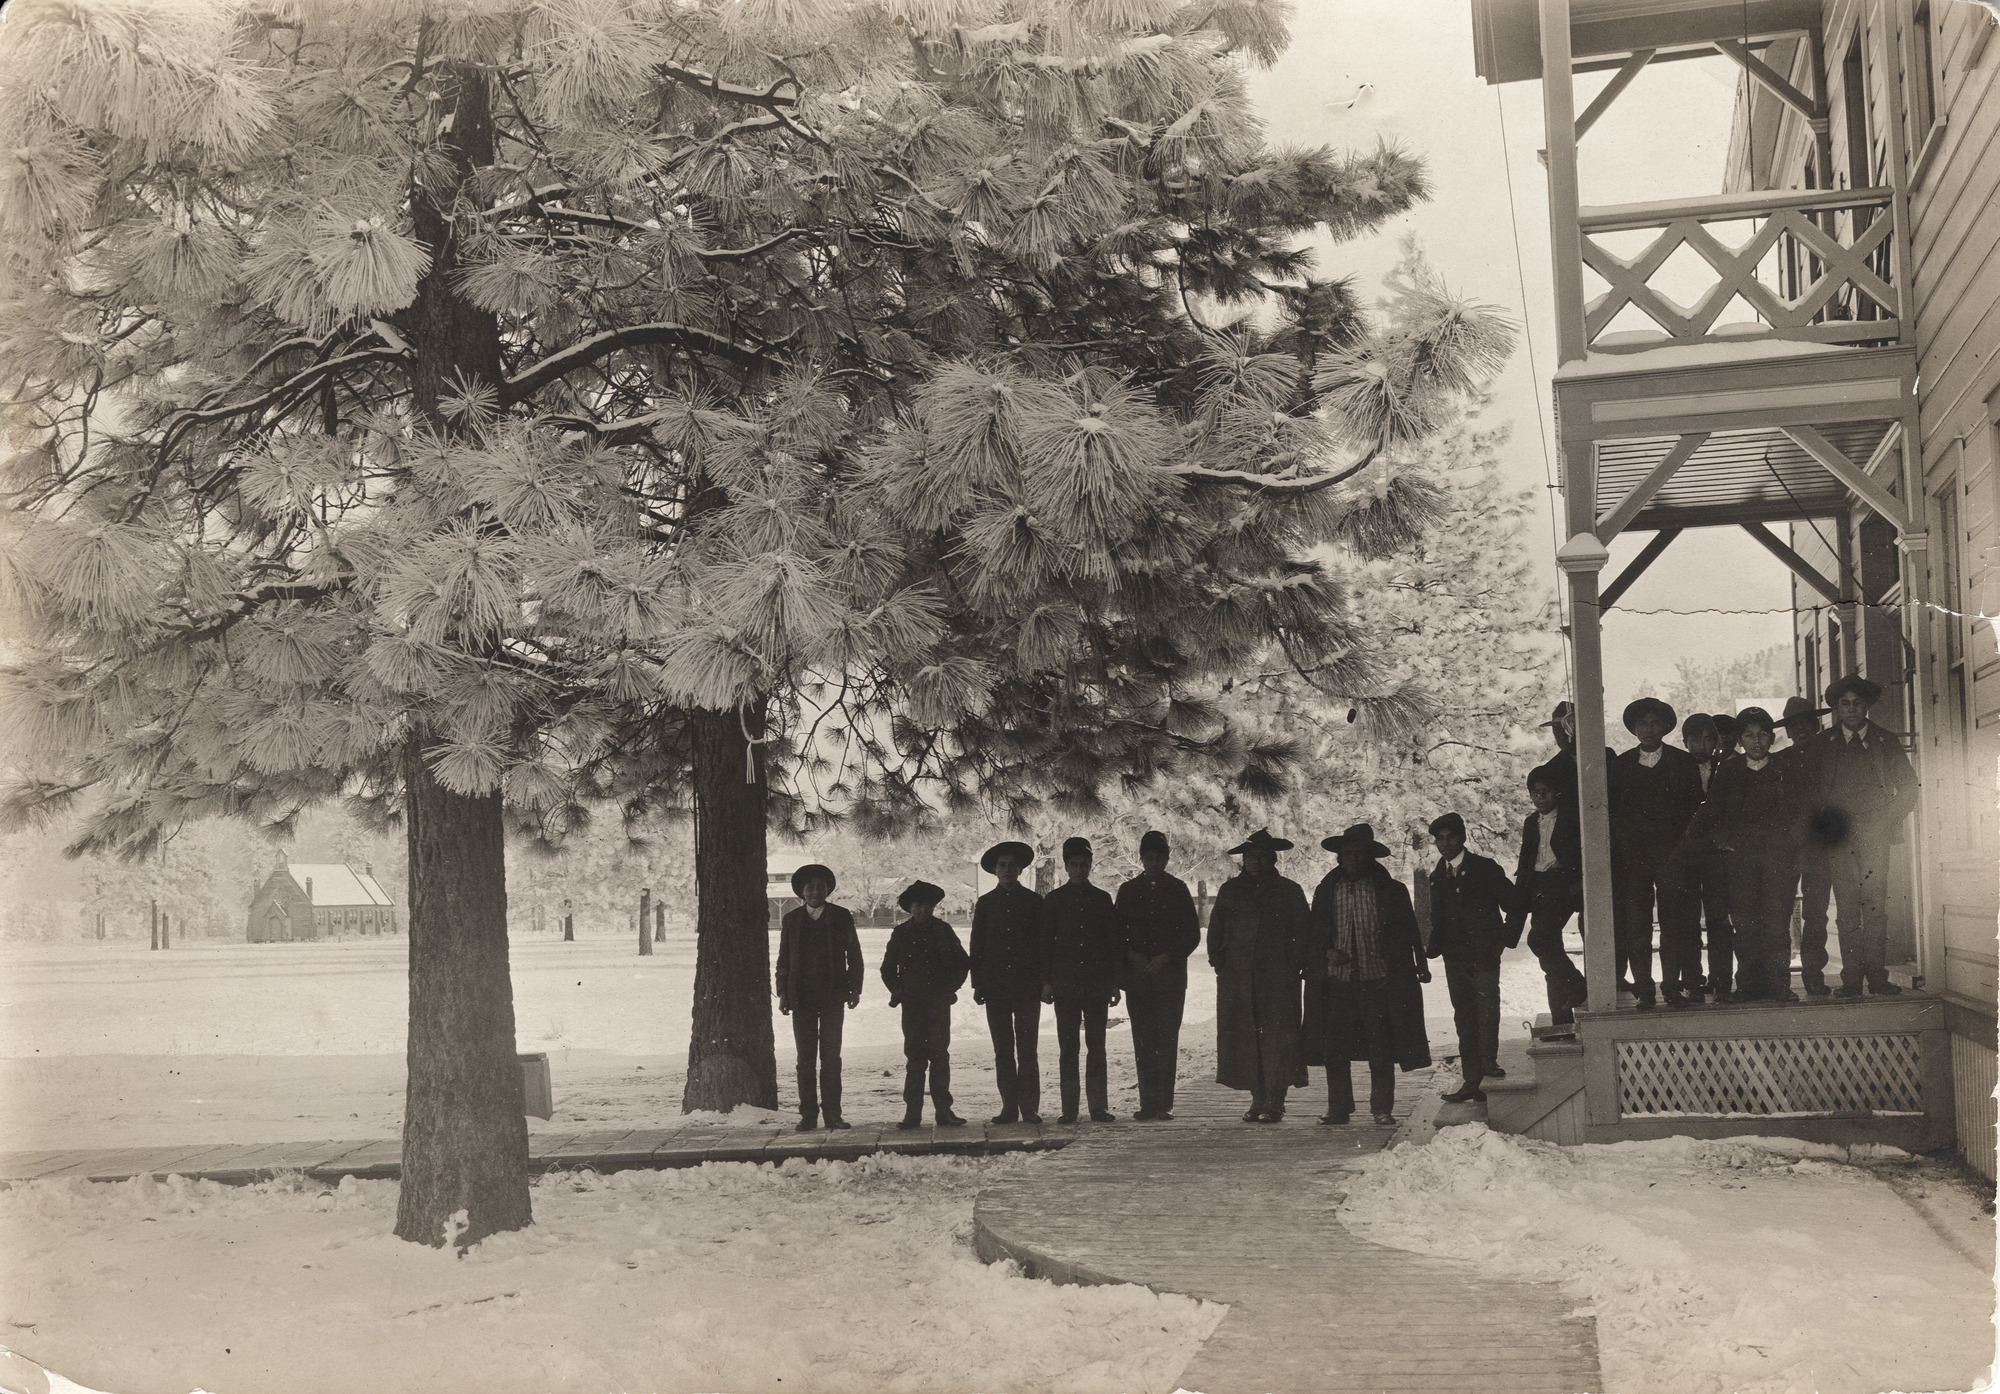 Black and white photograph of people standing outside a building among trees